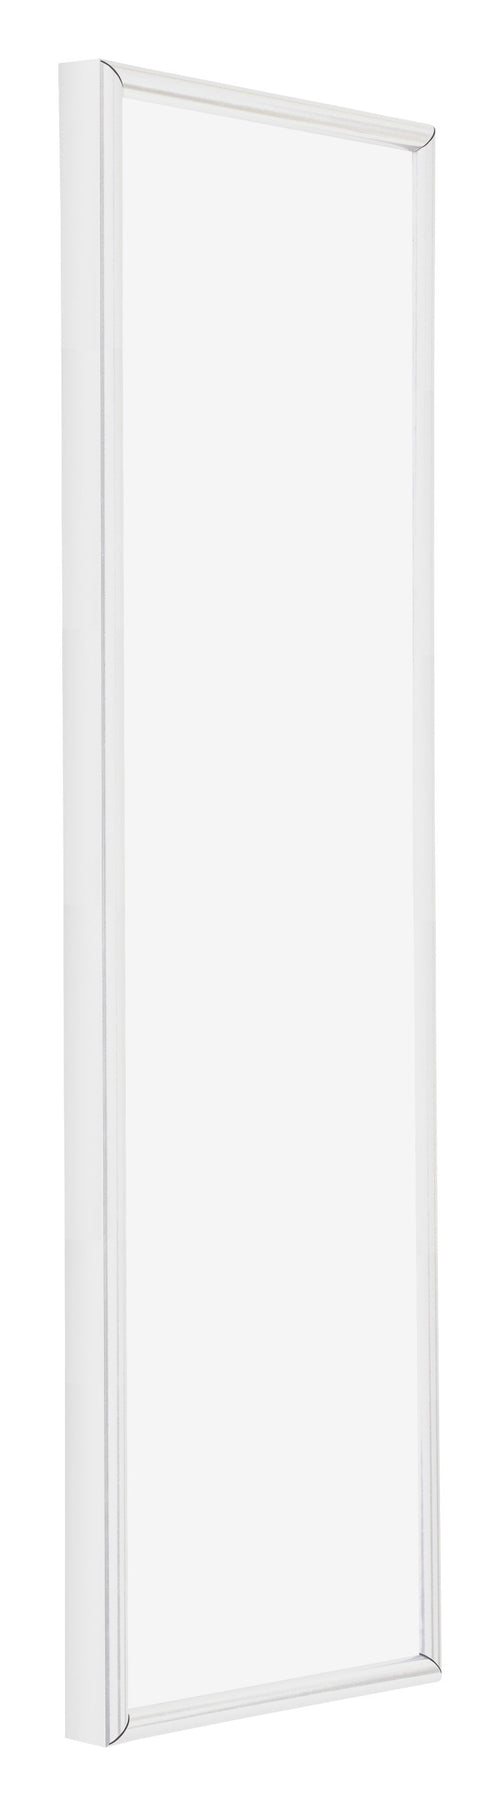 Annecy Plastic Photo Frame 25x75cm White High Gloss Front Oblique | Yourdecoration.com